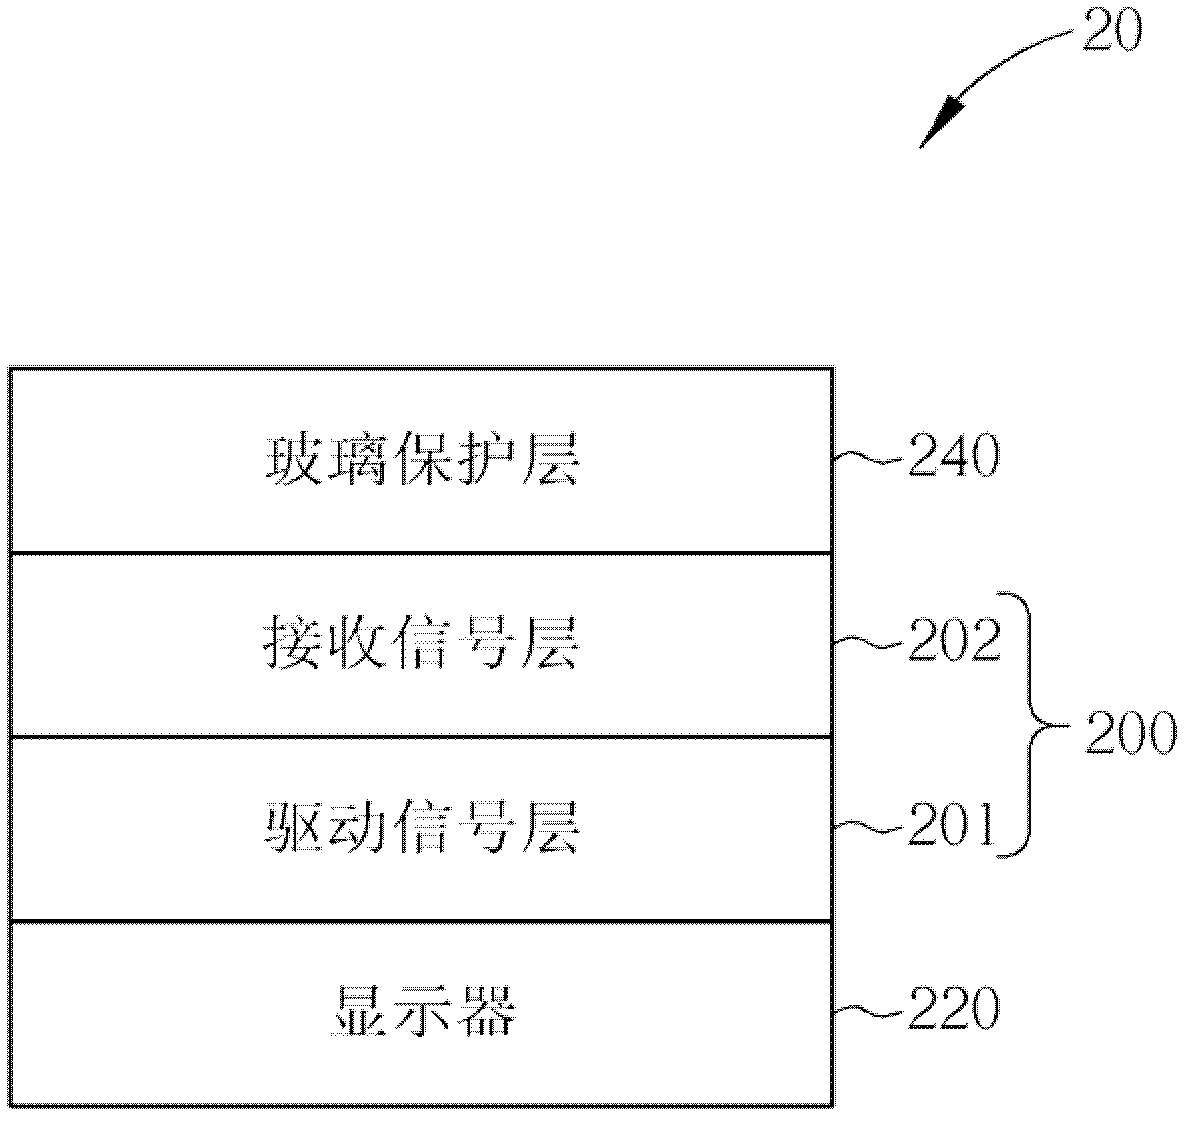 Capacitive touch display device